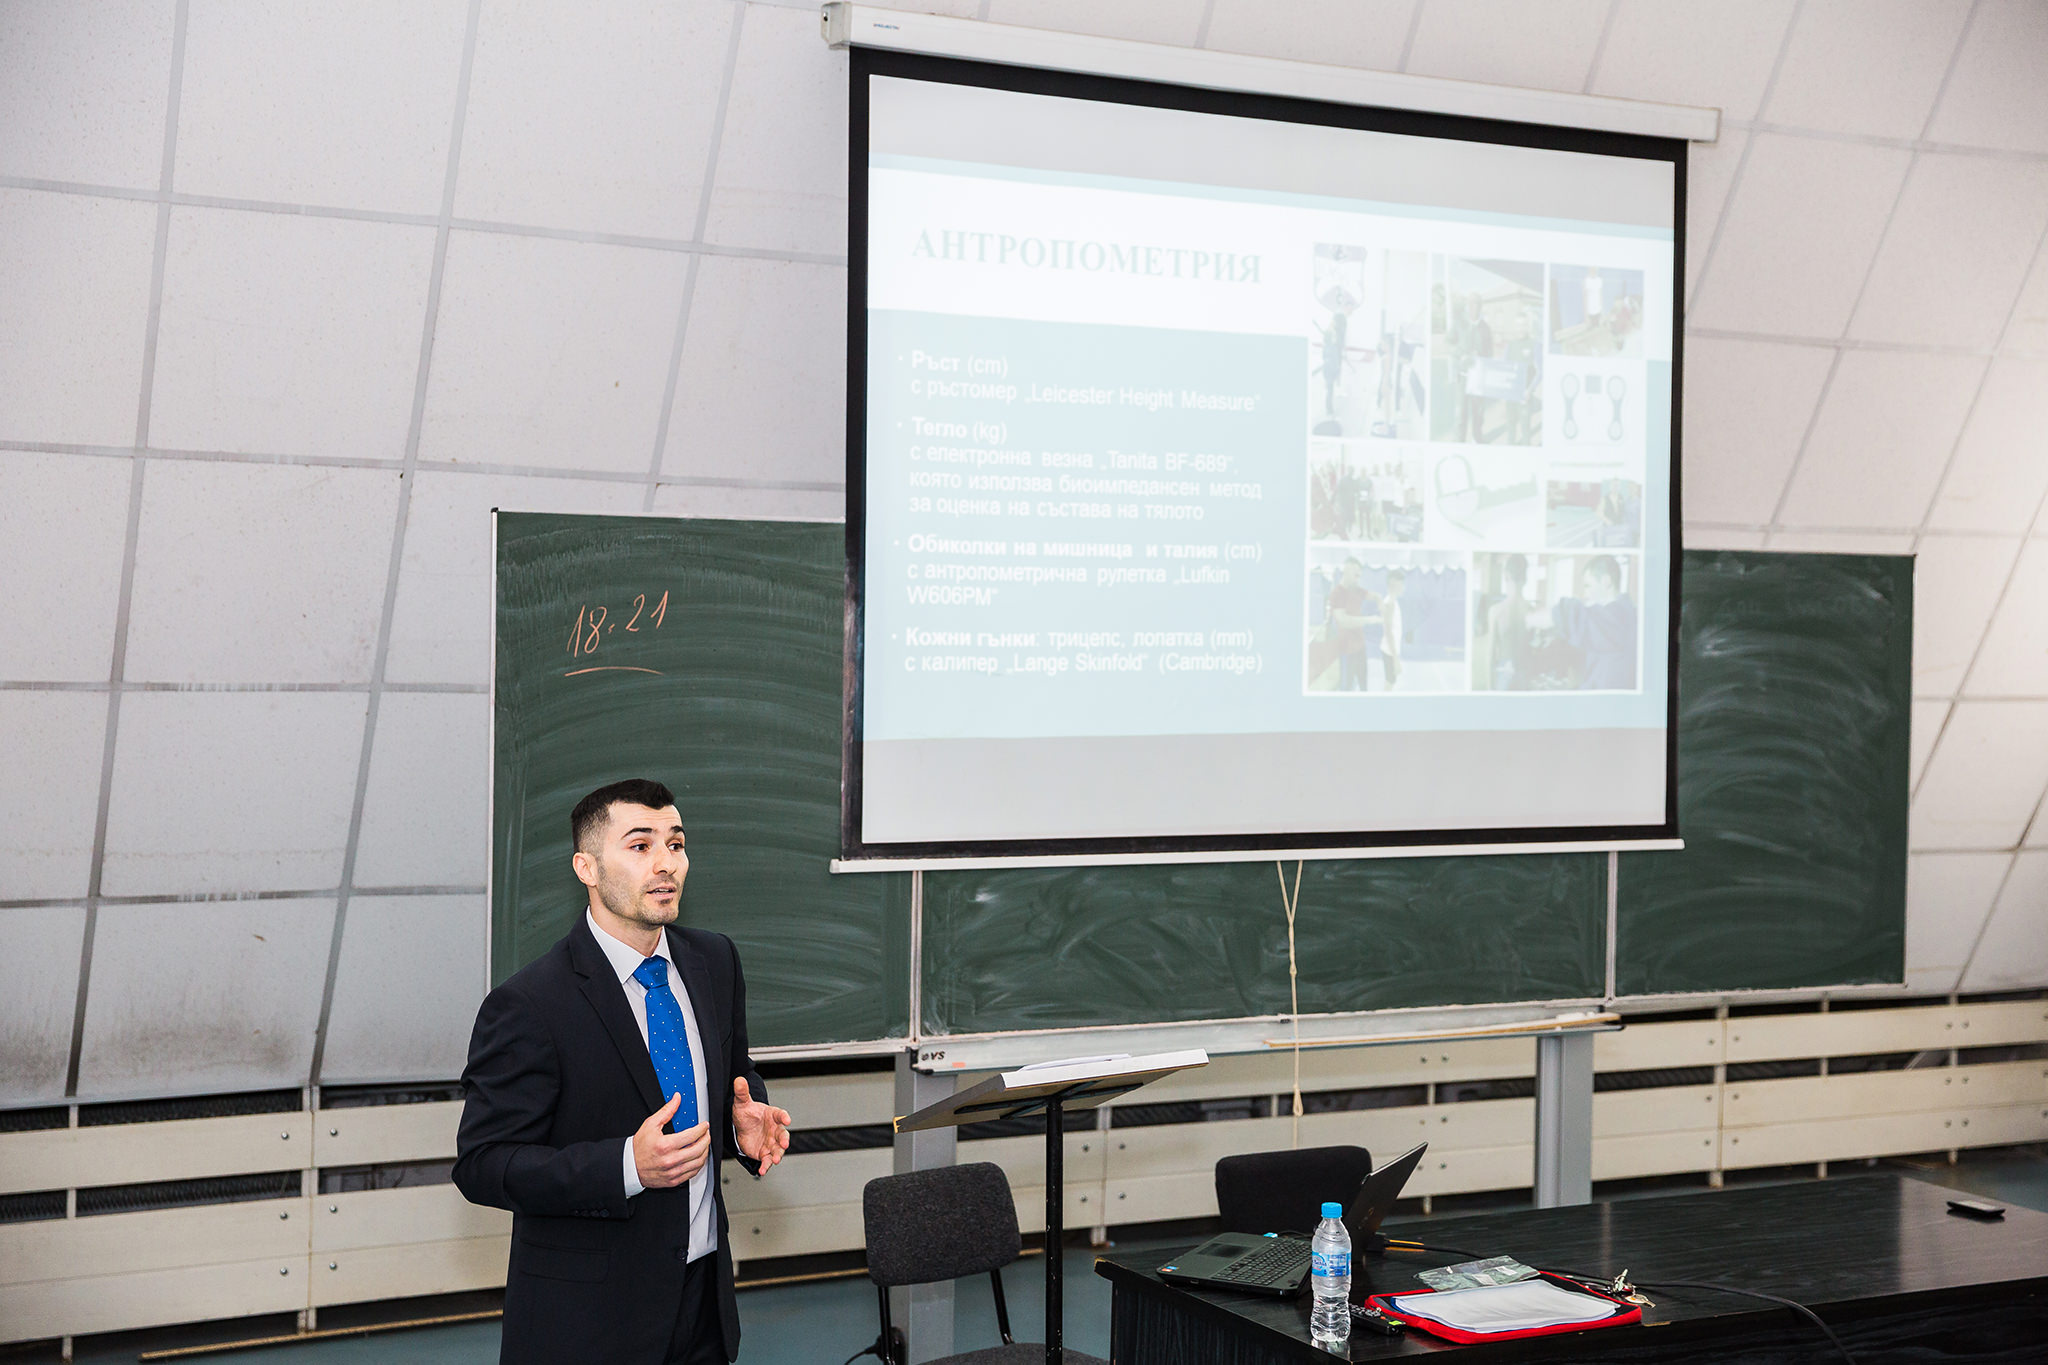 Dr Kolimechkov presents the methodology of his doctoral thesis